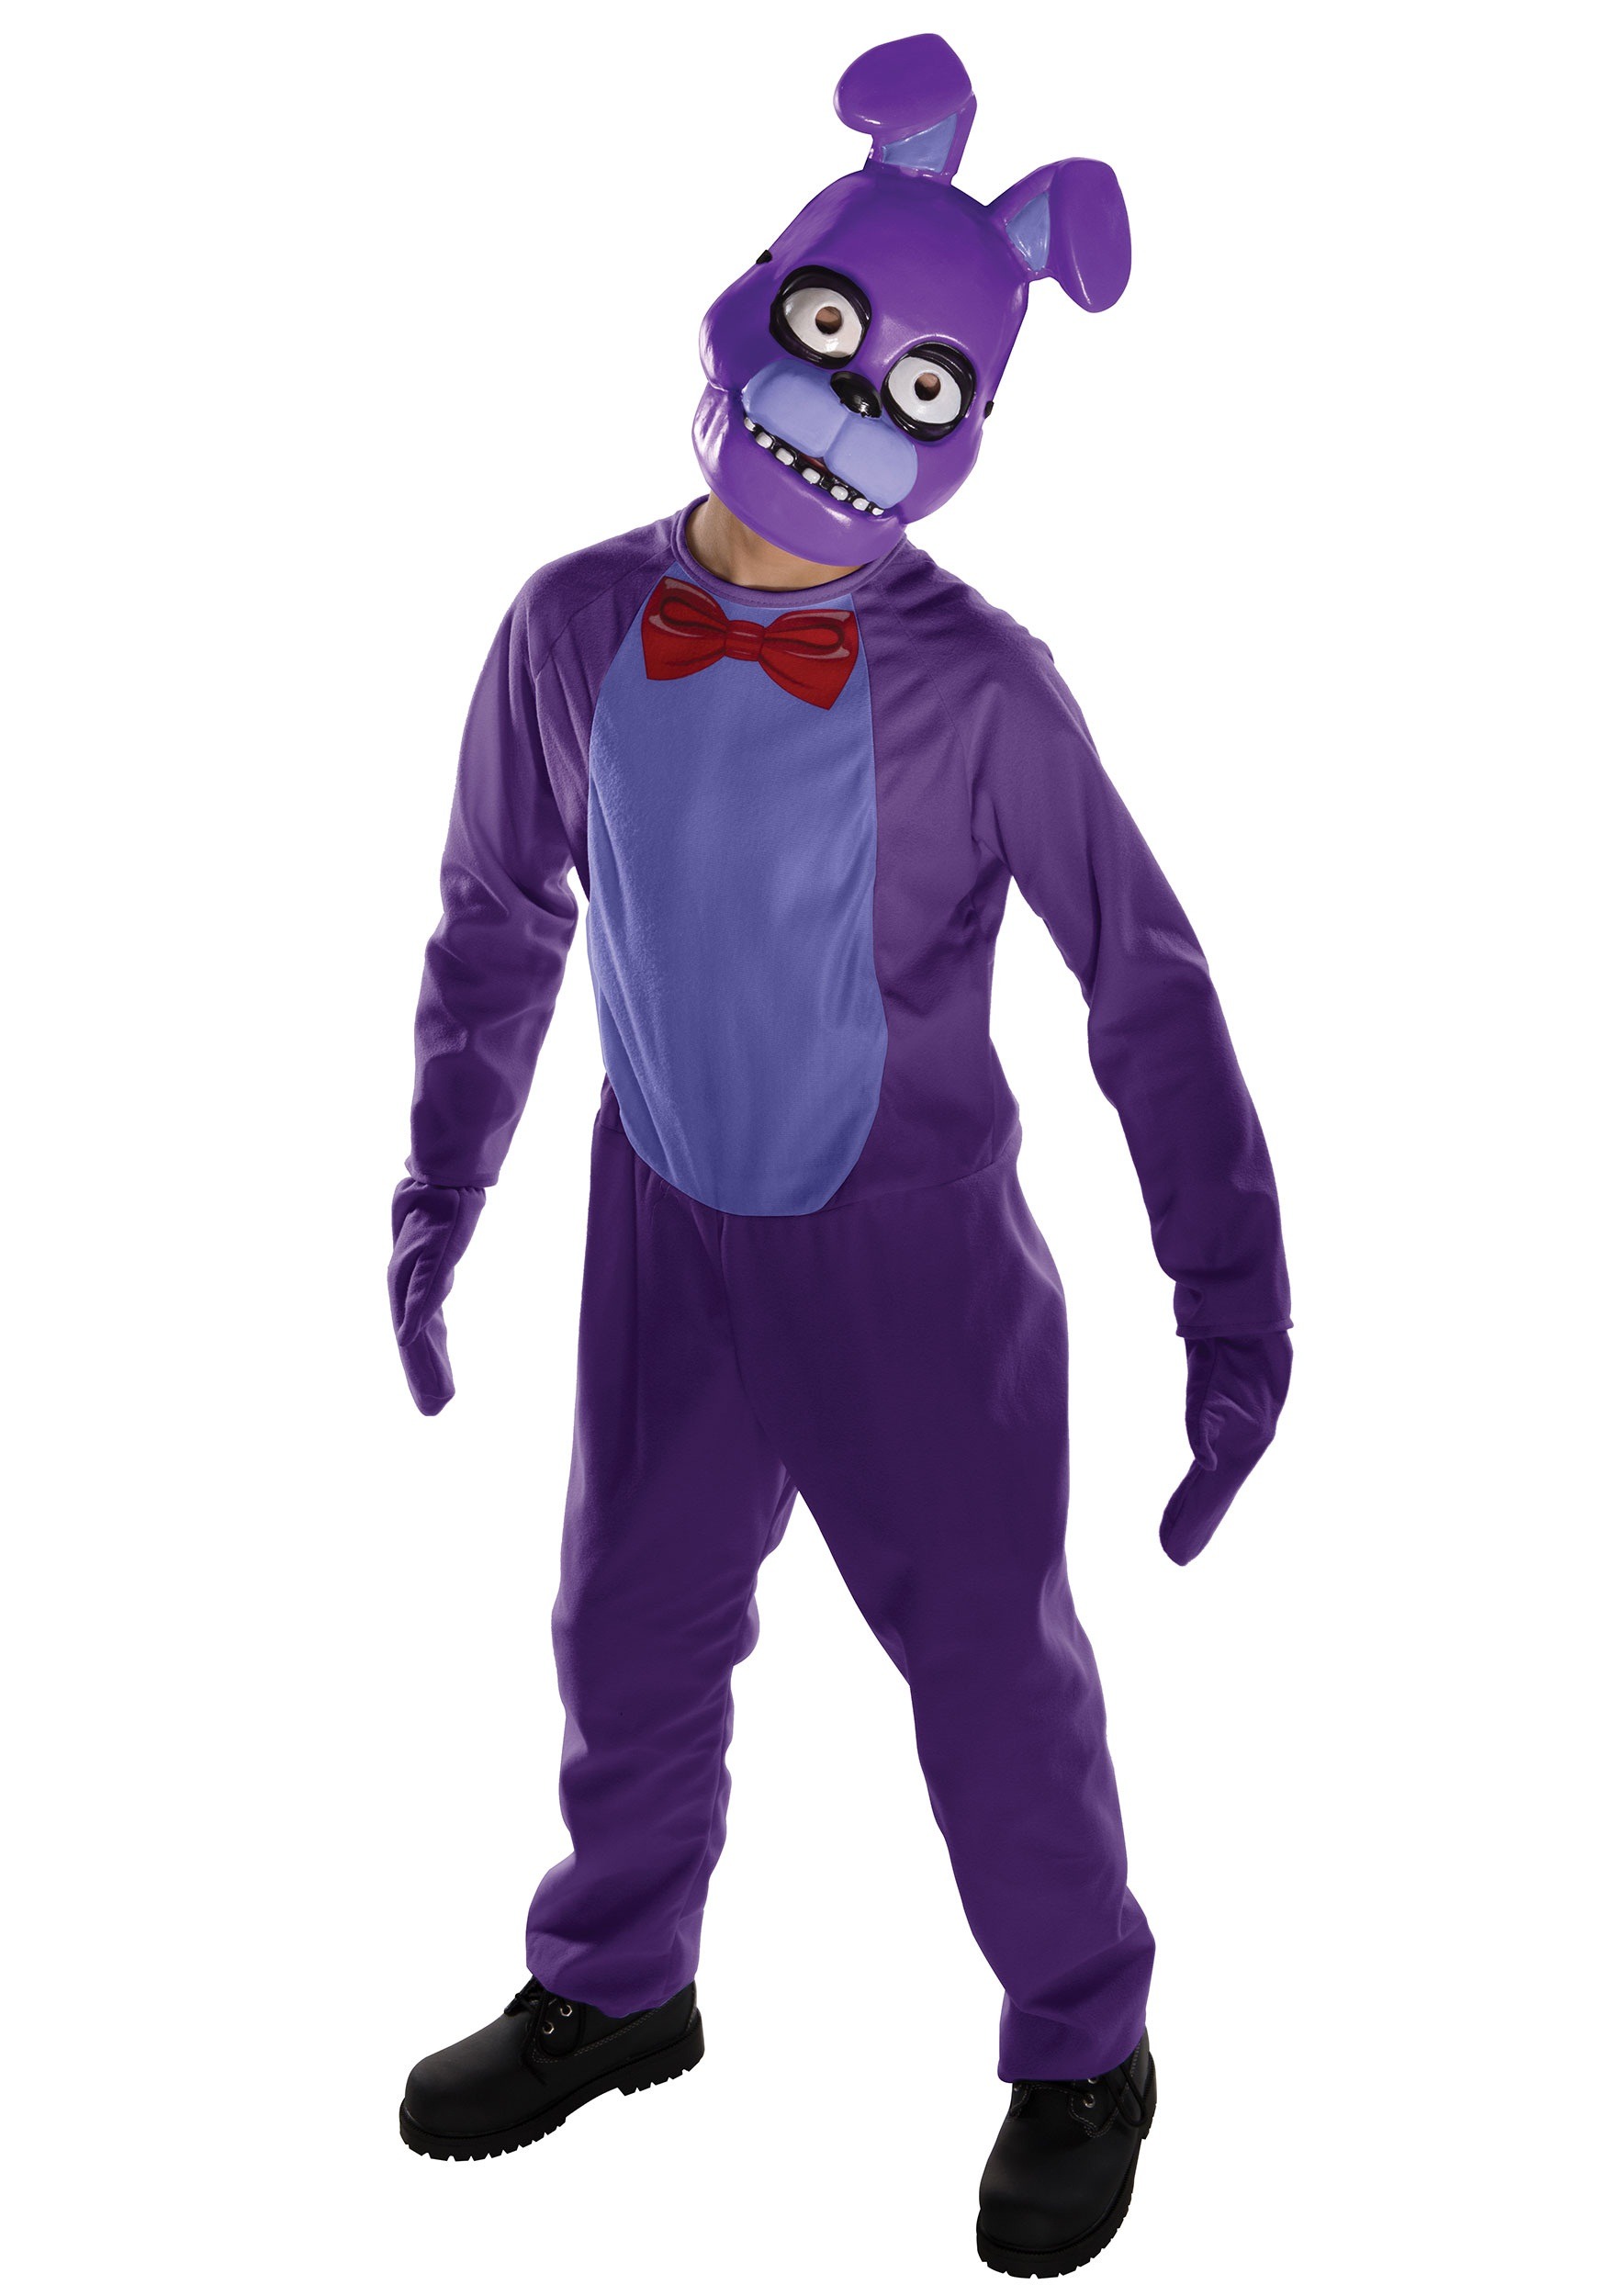 Puppet cosplay fnaf in 2023  Halloween costume anime, Horror halloween  costumes, Fnaf cosplay